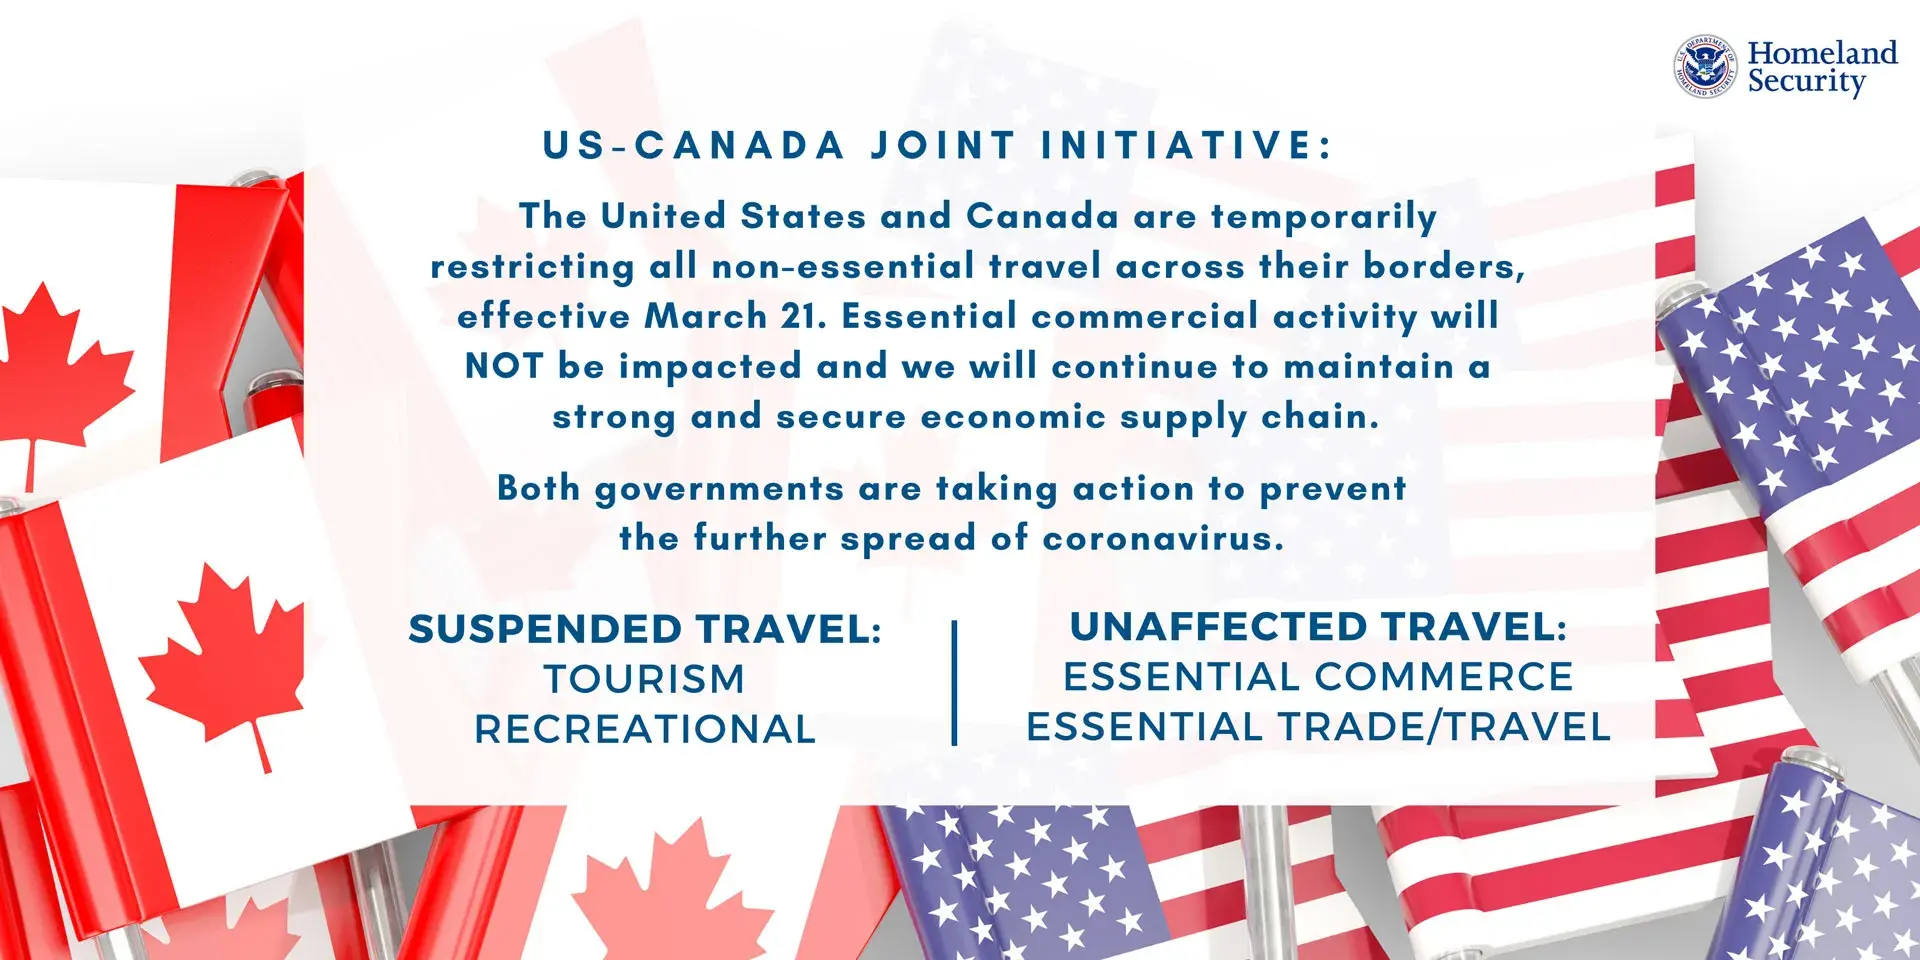 US-Canada Joint Initiative: The United States and Canada are temporarily restricting all non-essential travel across their borders, effective March 21. Essential commercial activity will NOT be impacted and we will continue to maintain a strong and secure economic supply chain. Both government are taking action to prevent the further spread of coronavirus. | Suspended Travel: Tourism, Recreational | Unaffected Travel: Essential Commerce, Essential Trade/Travel